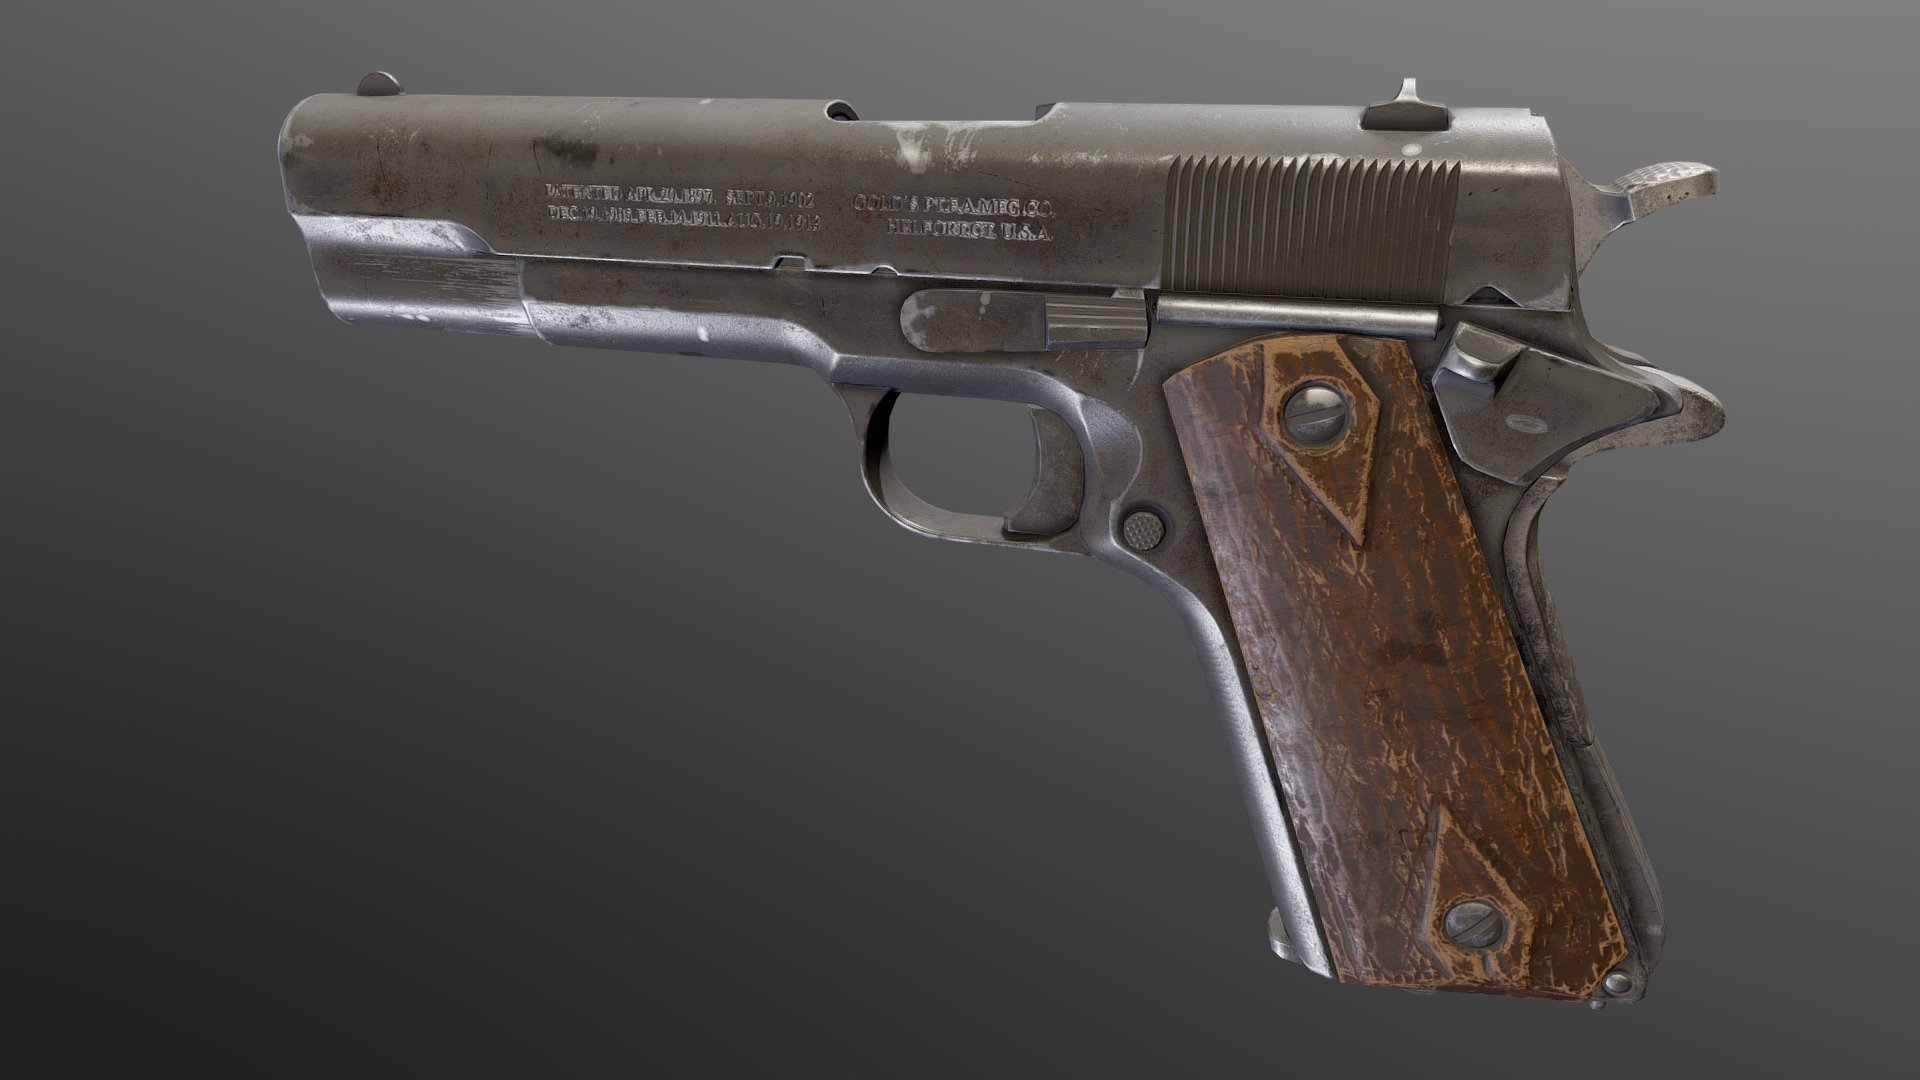 The M1911, also known as the Colt Government or &ldquo;Government